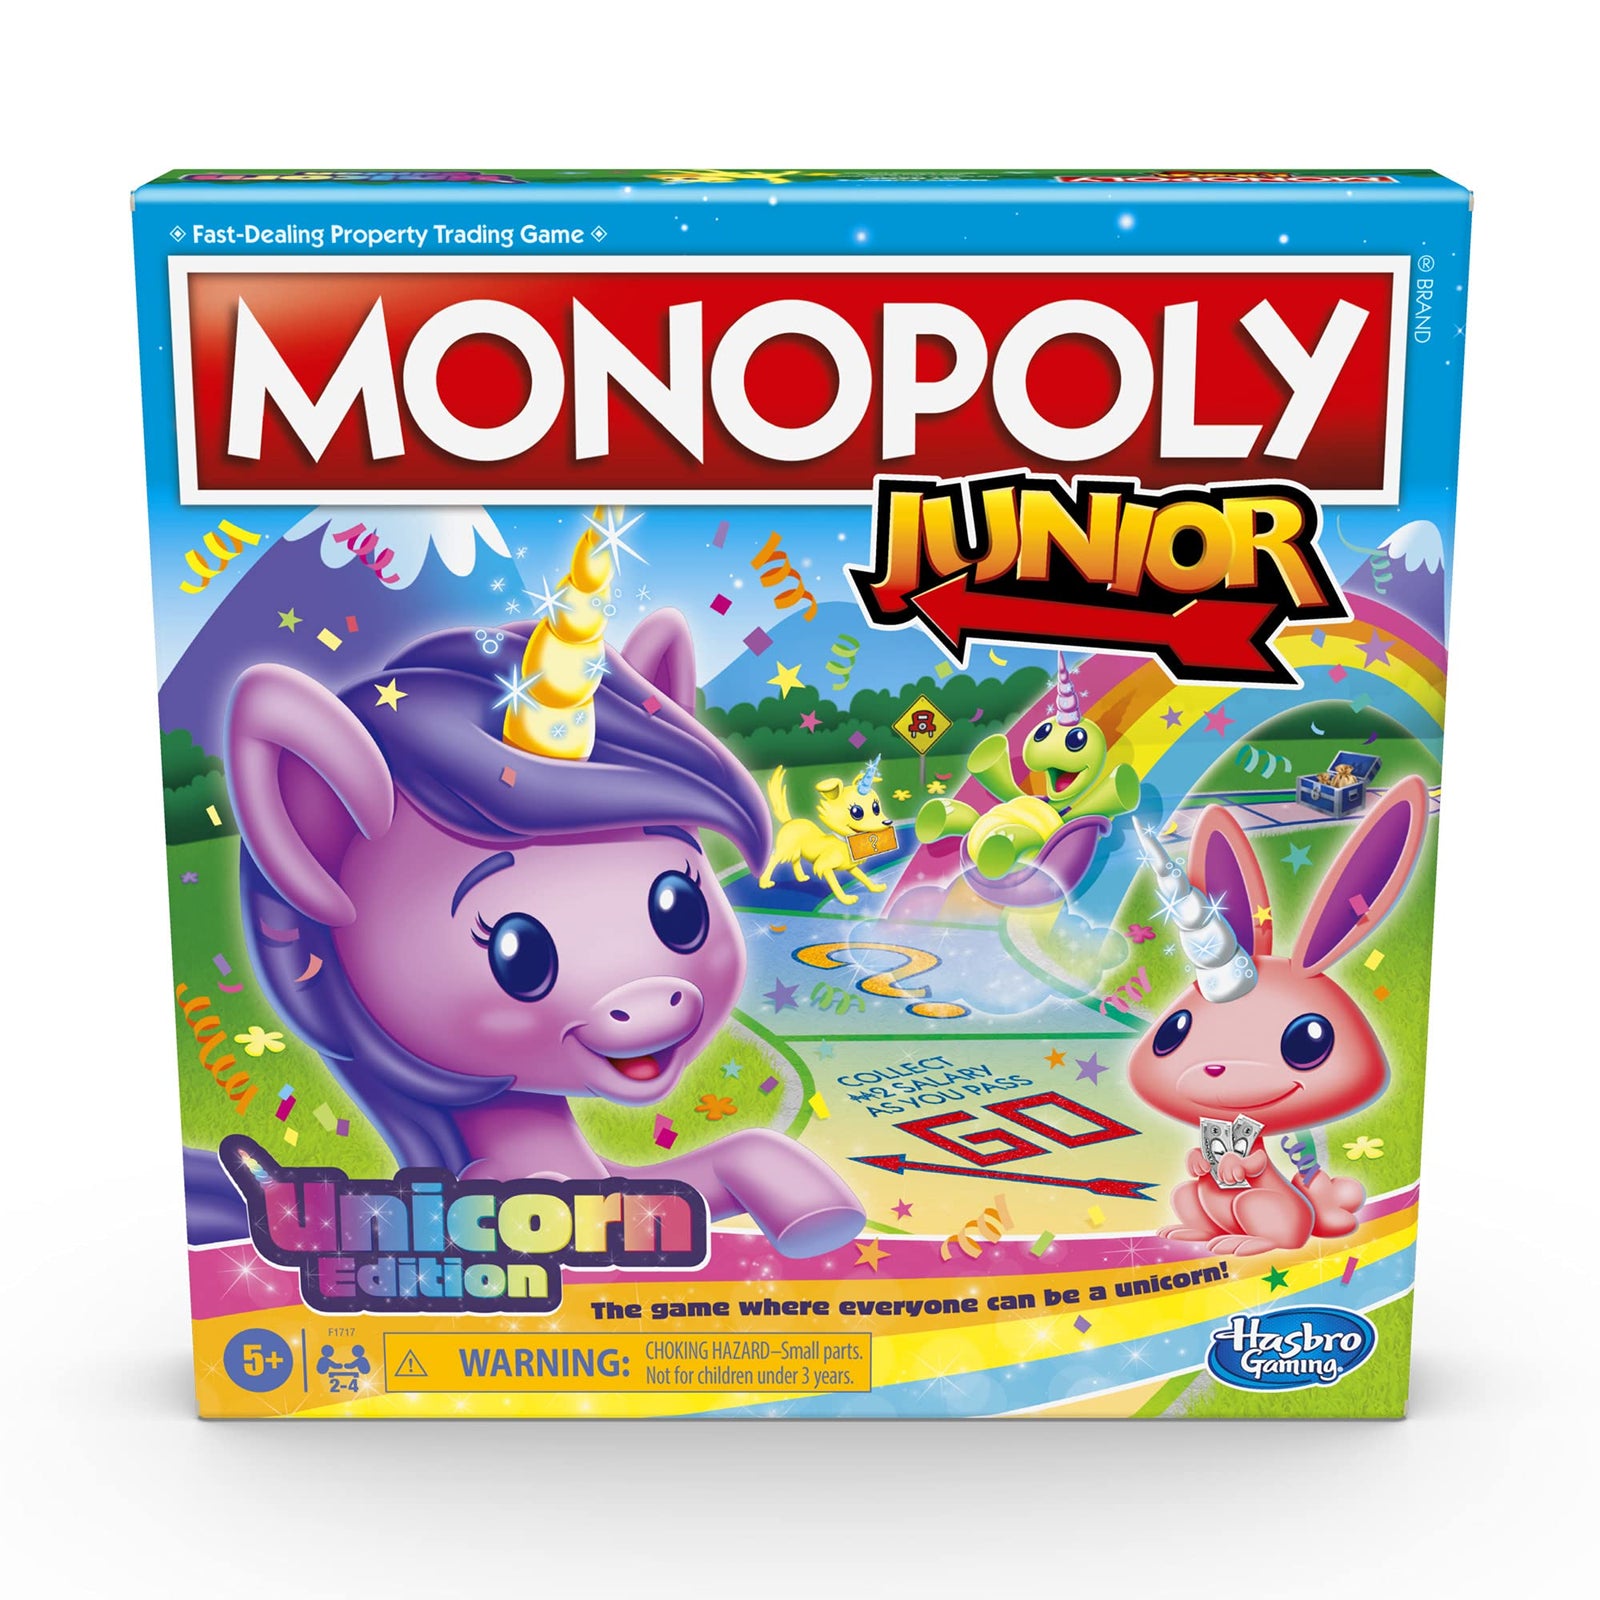 MONOPOLY Junior: Unicorn Edition Board Game for 2-4 Players, Magical-Themed Indoor Game for Kids Ages 5 and Up (Amazon Exclusive)